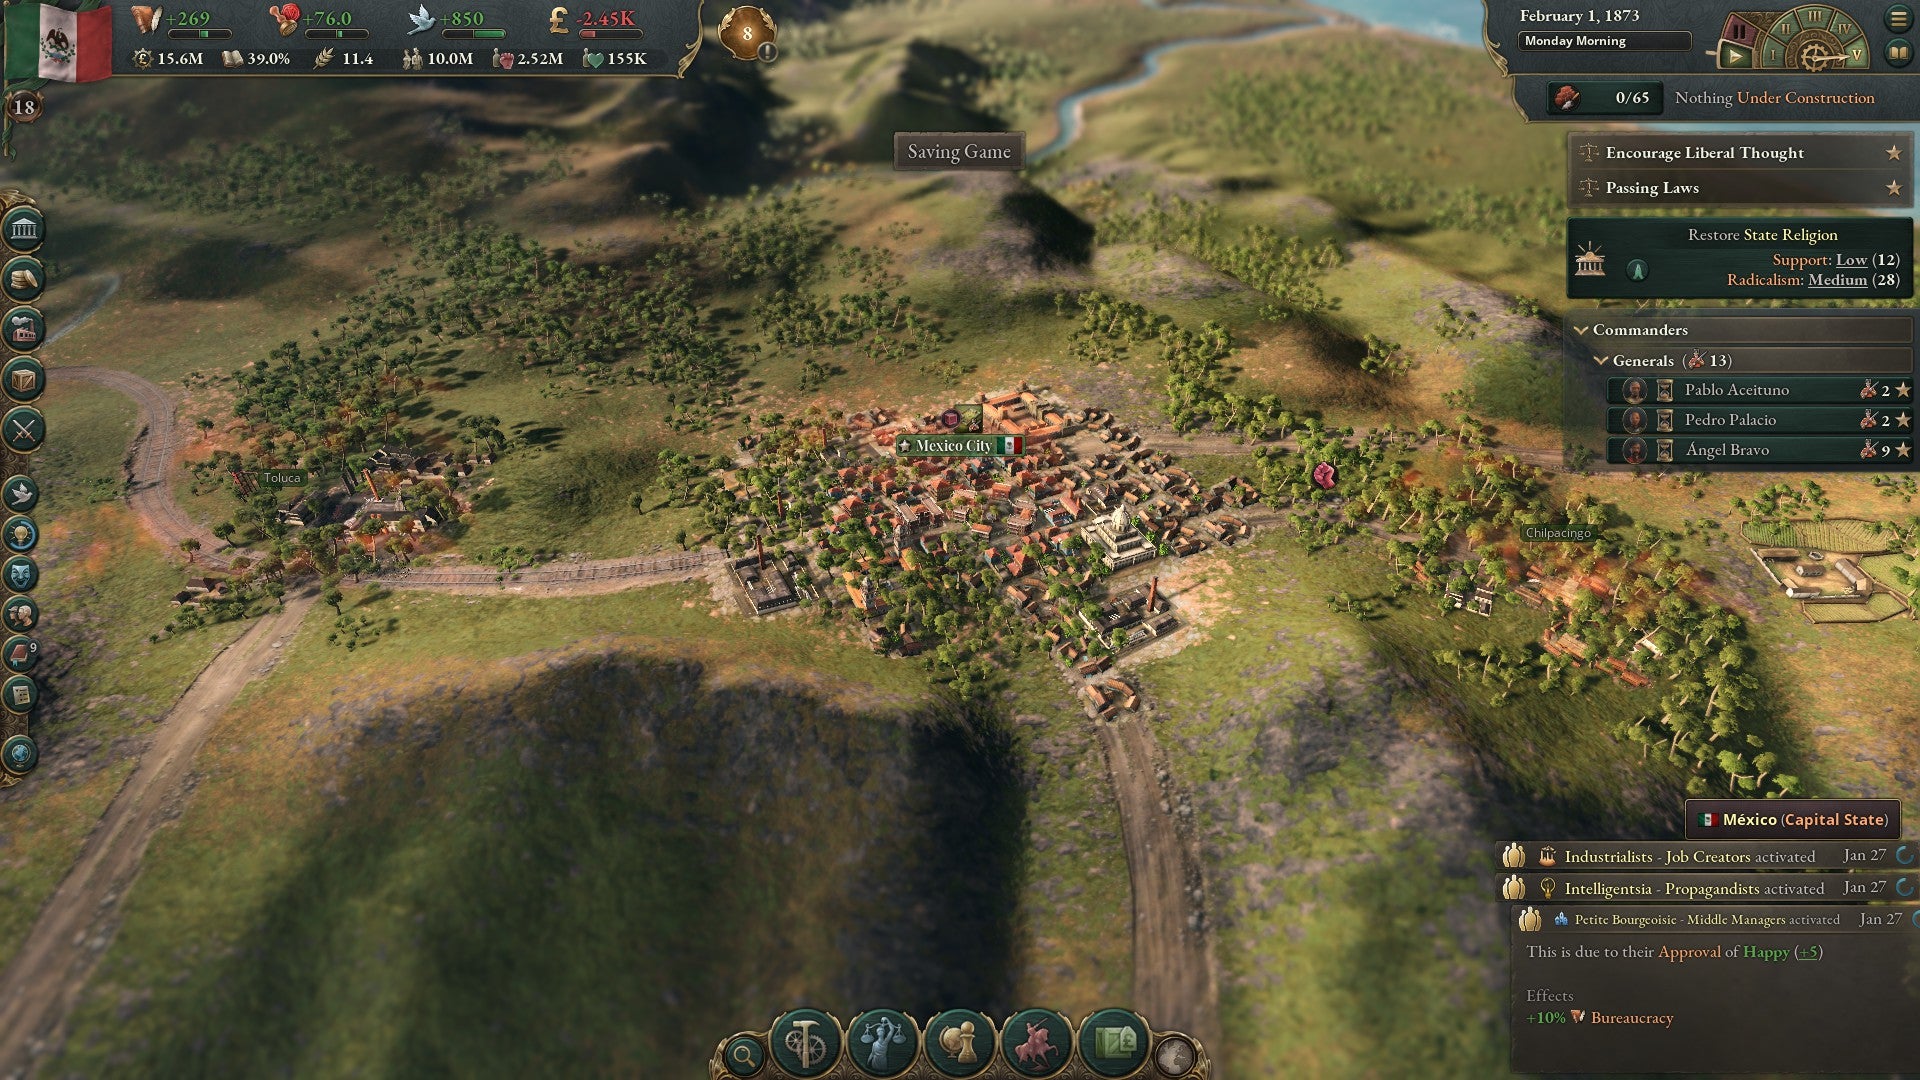 A screenshot from Victoria 3 showing a 3D model of Mexico City